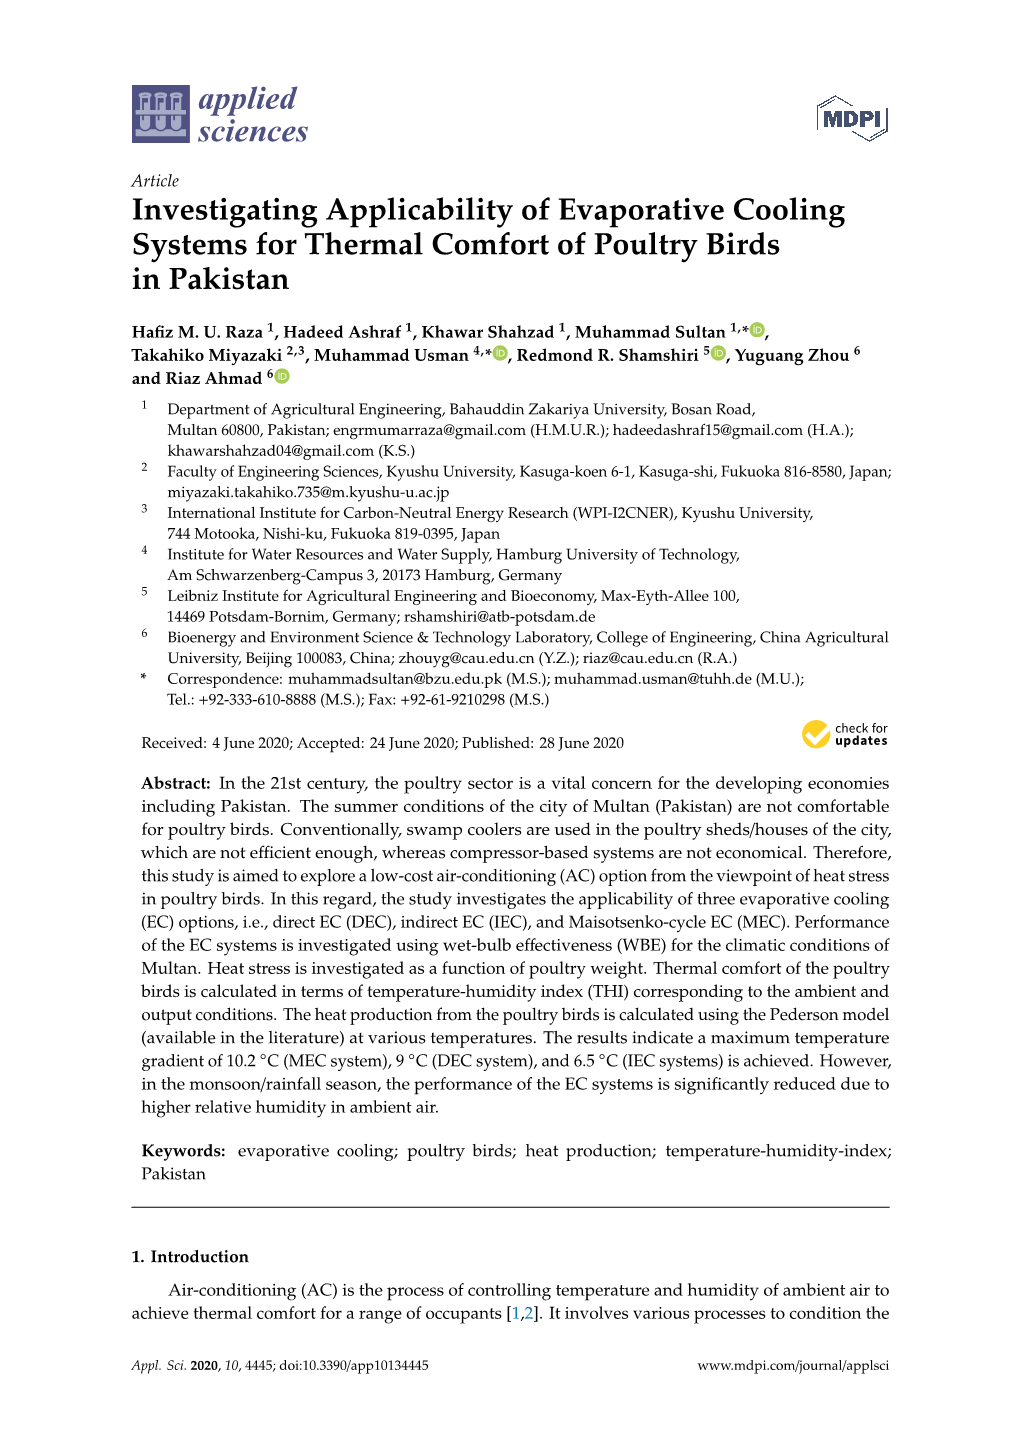 Investigating Applicability of Evaporative Cooling Systems for Thermal Comfort of Poultry Birds in Pakistan